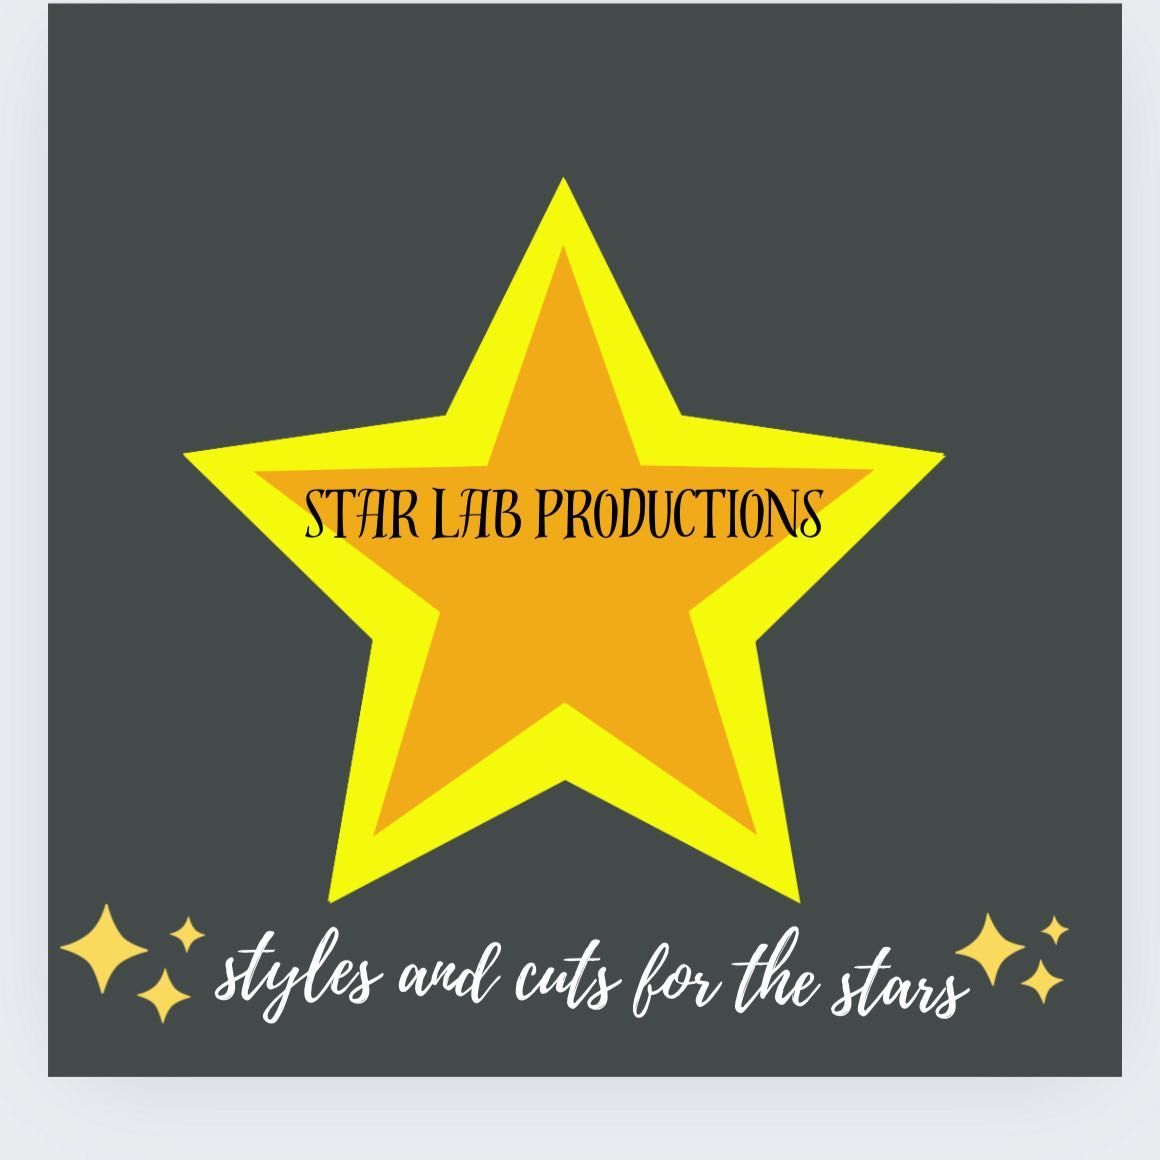 Star lab productions, 726 Plumtree Ln, Claymont, 19703